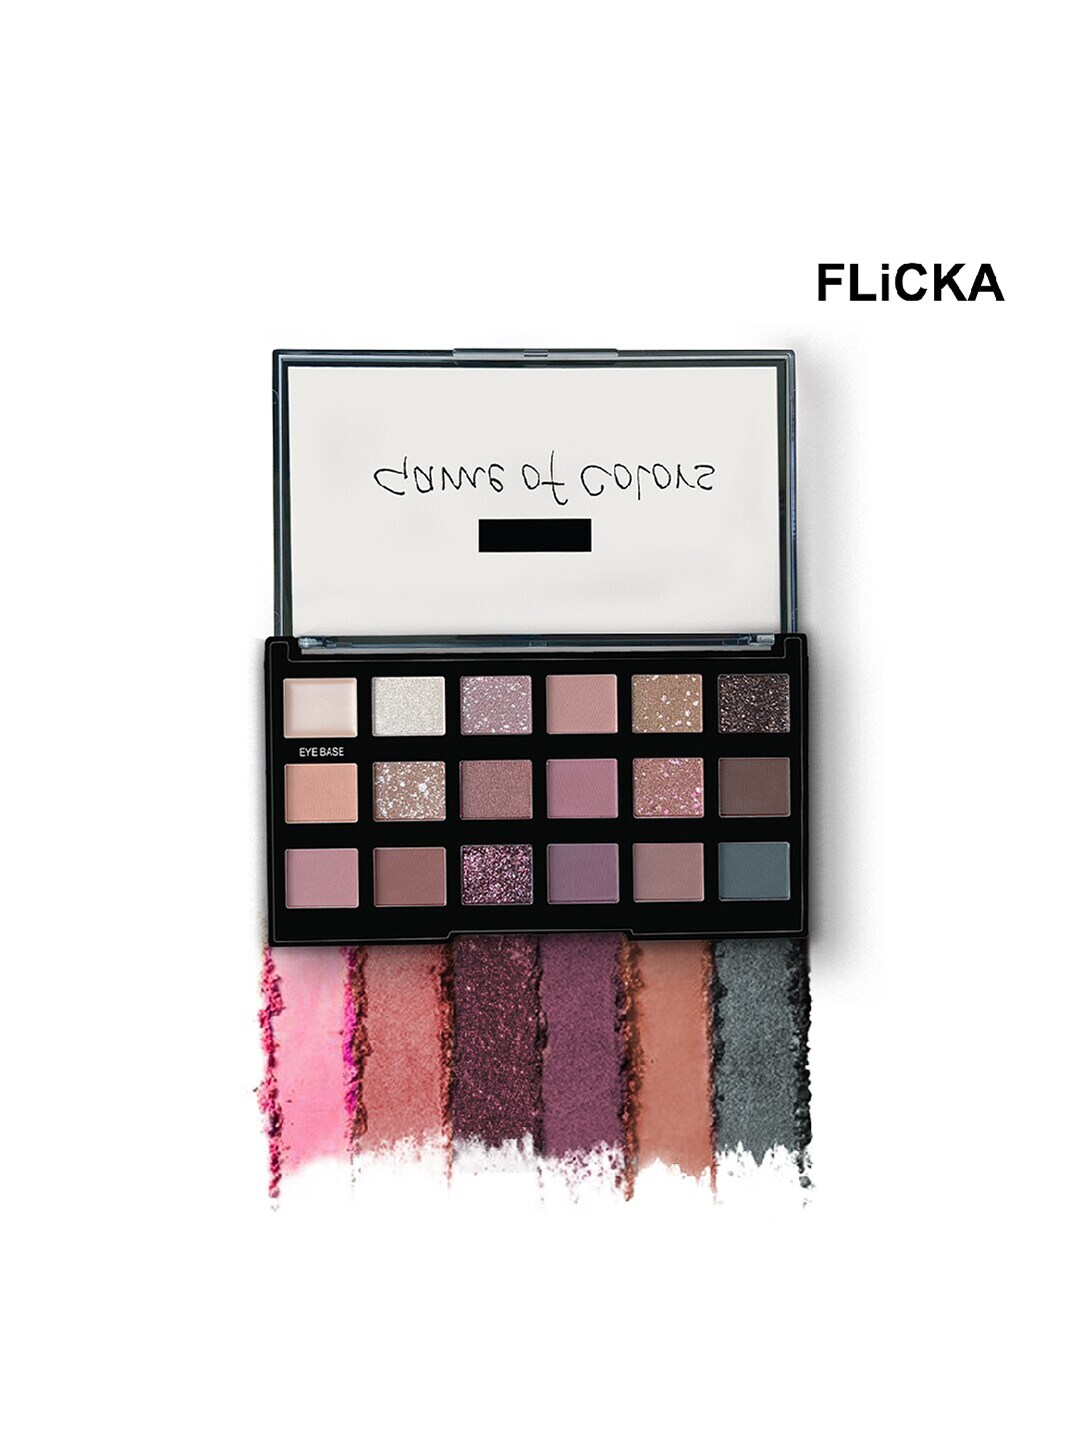 FLiCKA Game Of Colors Eyeshadow Palette - On First Thought 03 Price in India